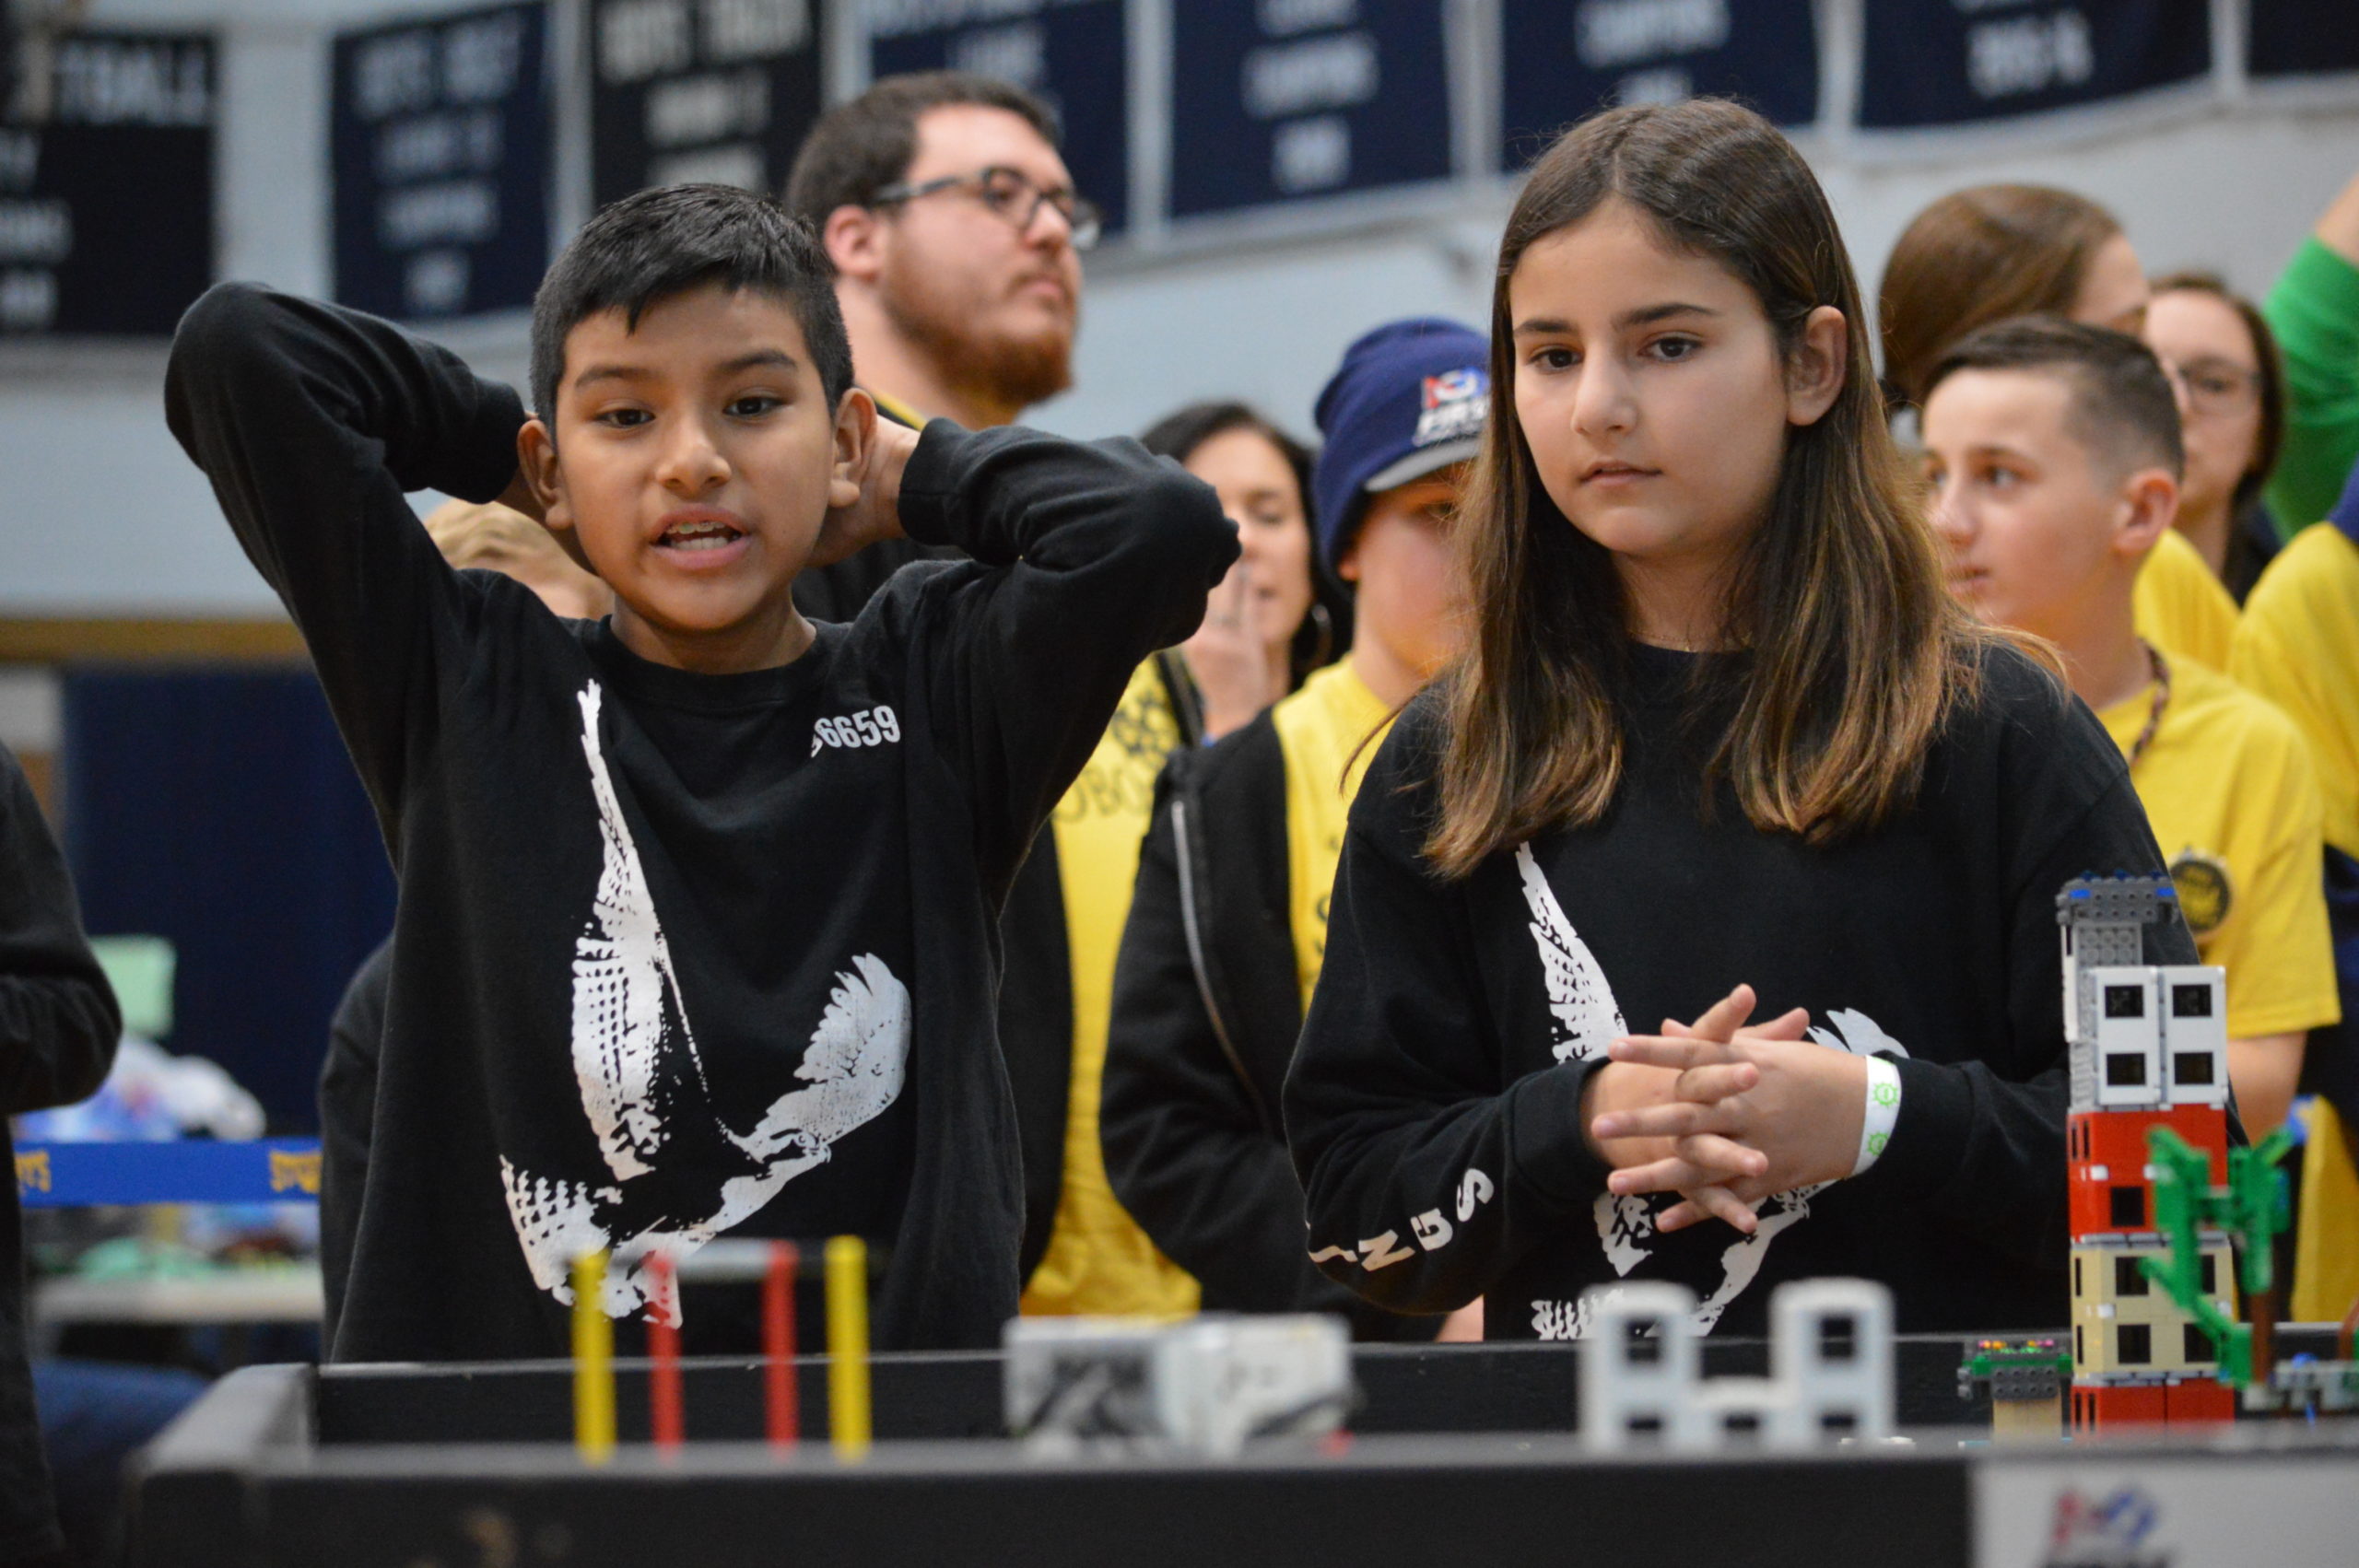 Three teams from Springs School — the Springin’ Ospreys, the Springs School Robonkacers and the Bionic Bonac Builders — competed Saturday at Huntington High School in one of seven qualifier rounds of the Long Island FIRST LEGO League Tournament season. While none of the teams, comprising students in fifth, sixth and seventh grades, advanced to the Long Island final, the teams all placed in the top 10 of the robotics competition. Ariel Puin Mayancela, left, and Shanli Yaghoubi compete for the Springin’ Ospreys at Huntington High School on Saturday. GAVIN MENU 